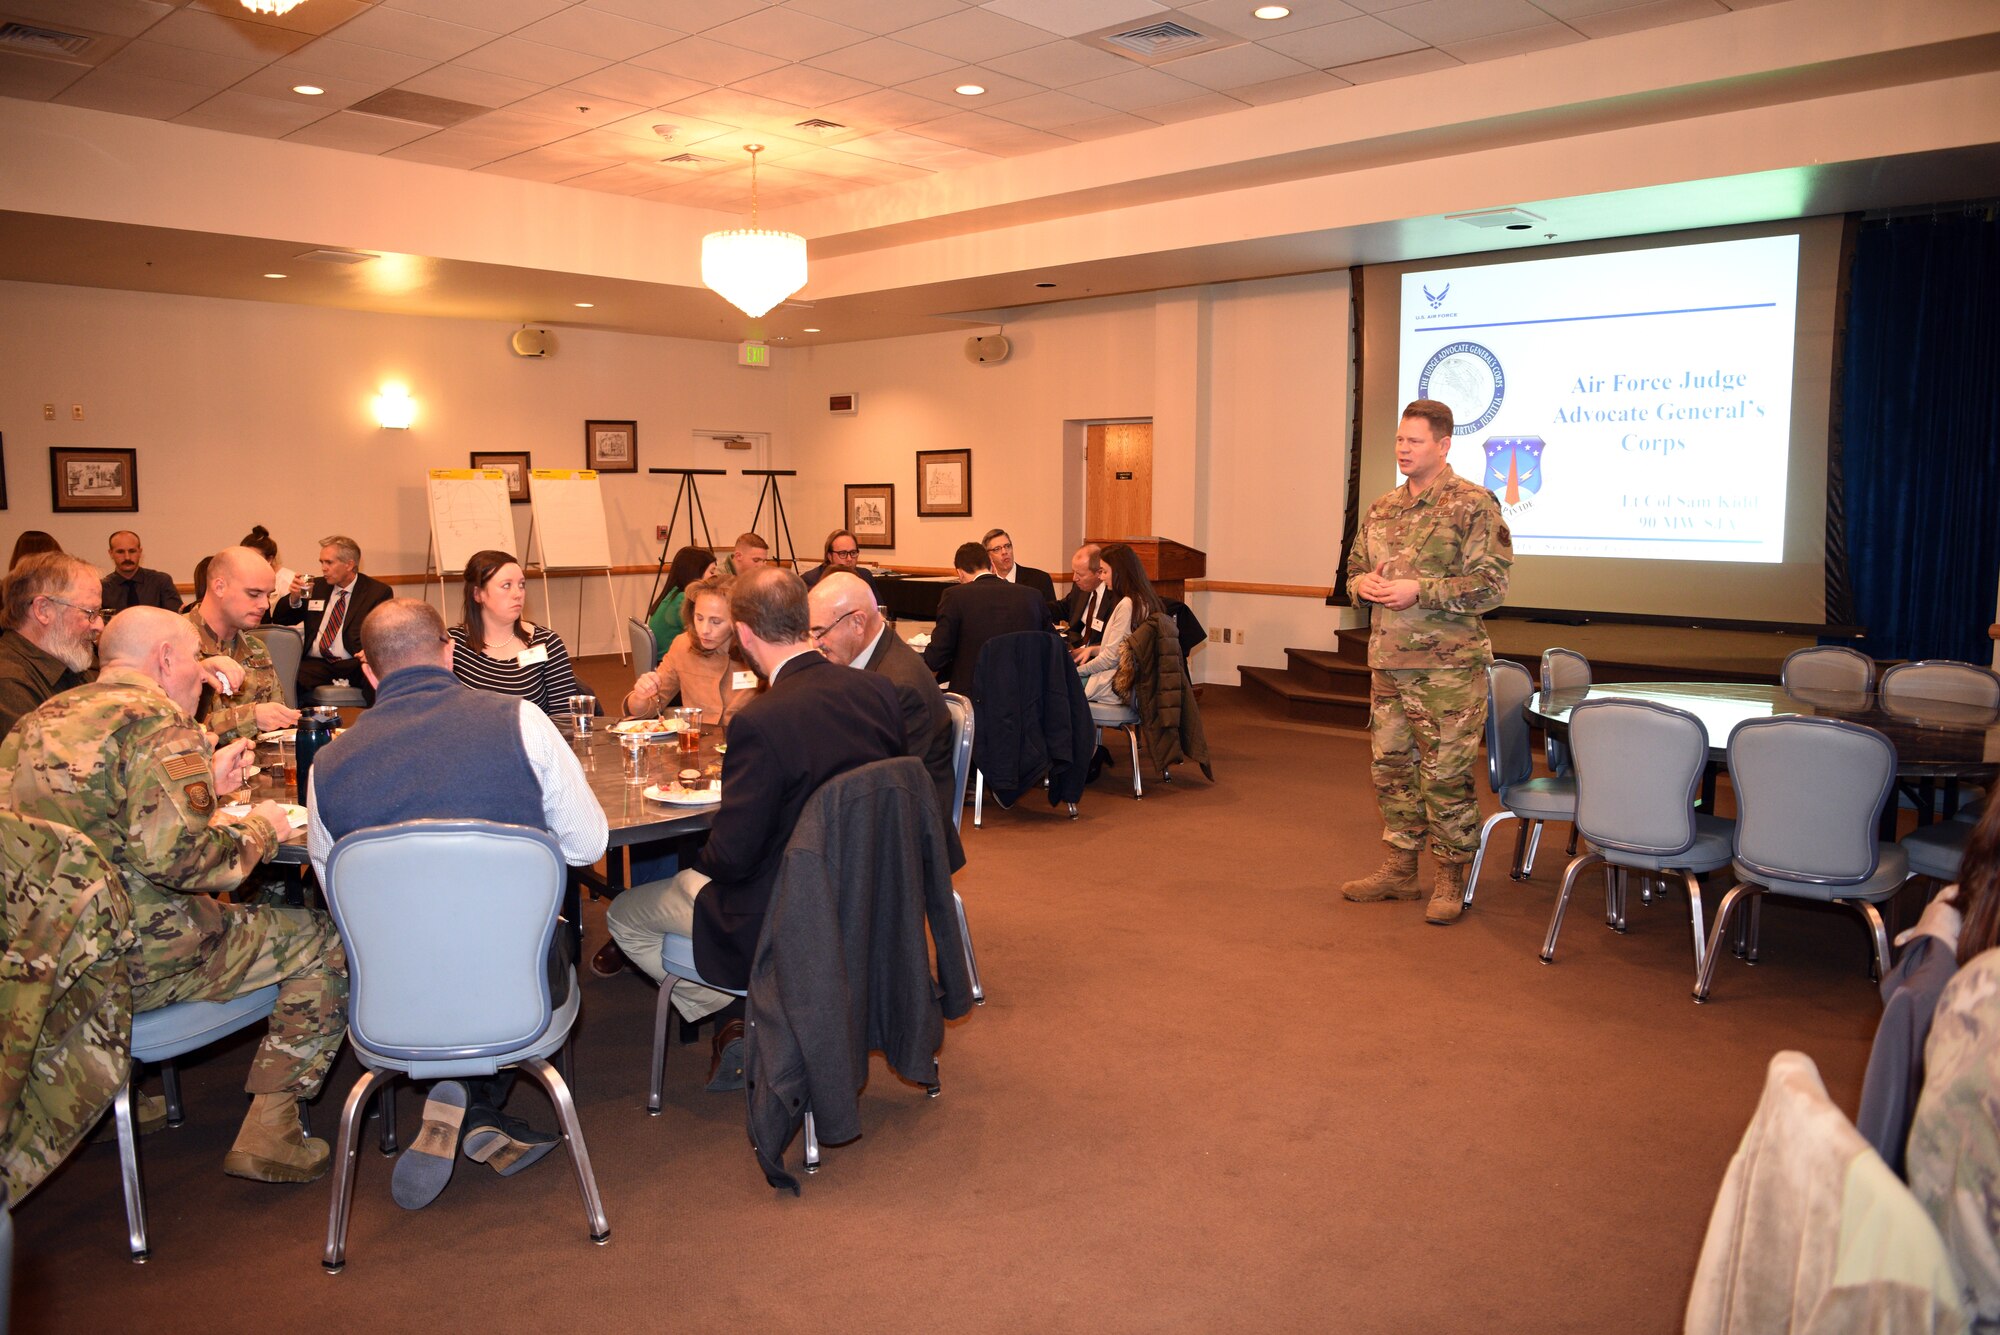 Col. Peter Bonetti, commander of the 90th Missile Wing, addresses a visiting group from the local chapter of the American Inns of Court during a tour on base Nov. 7, 2019, on F. E. Warren Air Force Base, Wyo. Members of the Inns of Court included justices from the state supreme court, law professors from the University of Wyoming, and local attorneys. The tour was intended to promote stronger relationships between the base legal professionals and their local civilian counterparts. (U.S. Air Force photo by Glenn S. Robertson).